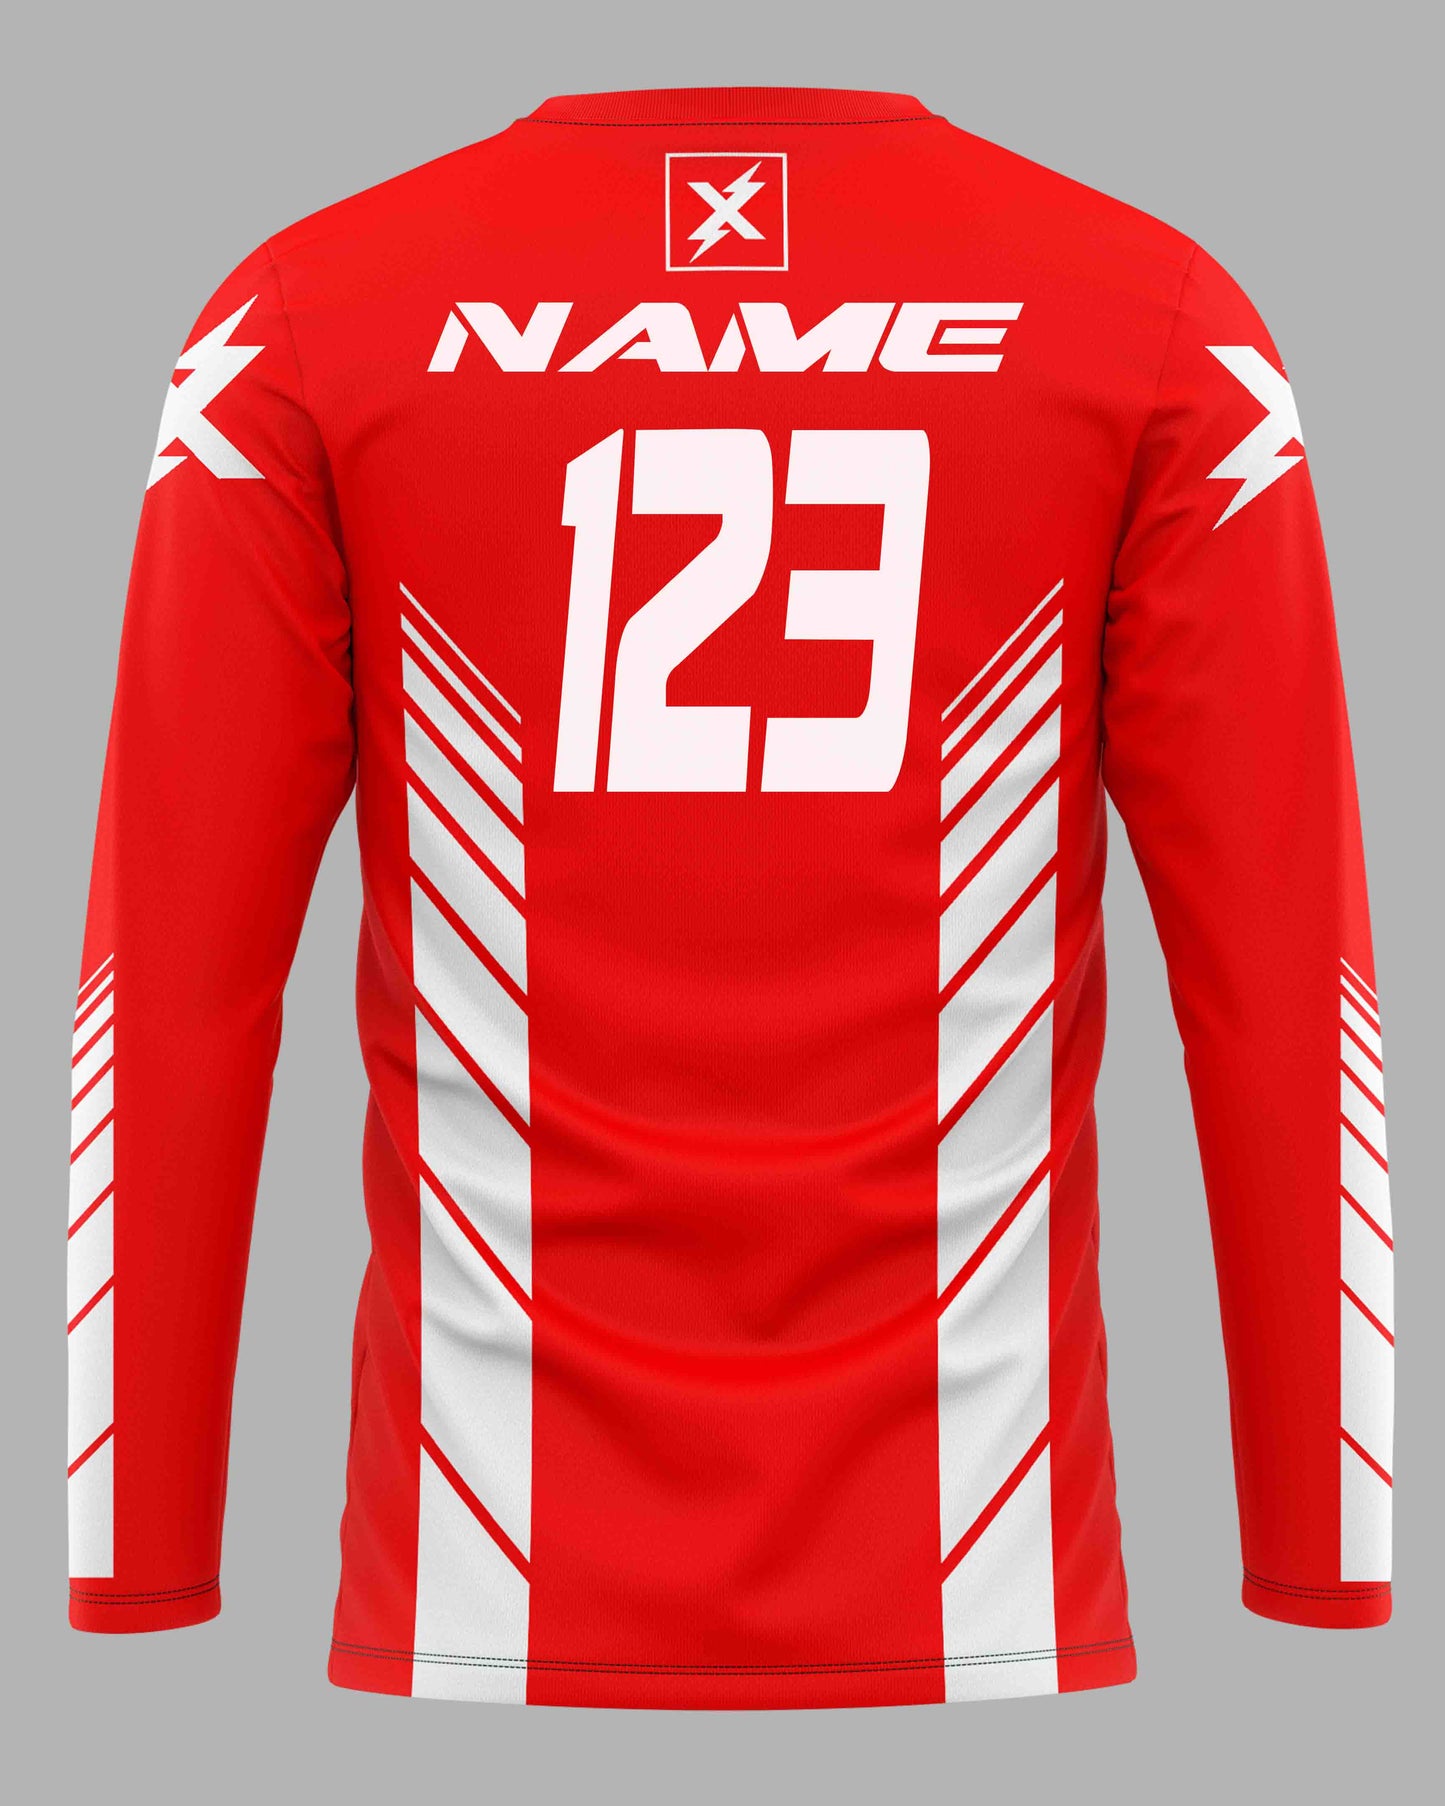 Jersey Speed Lines Red - FREE Custom Sublimation